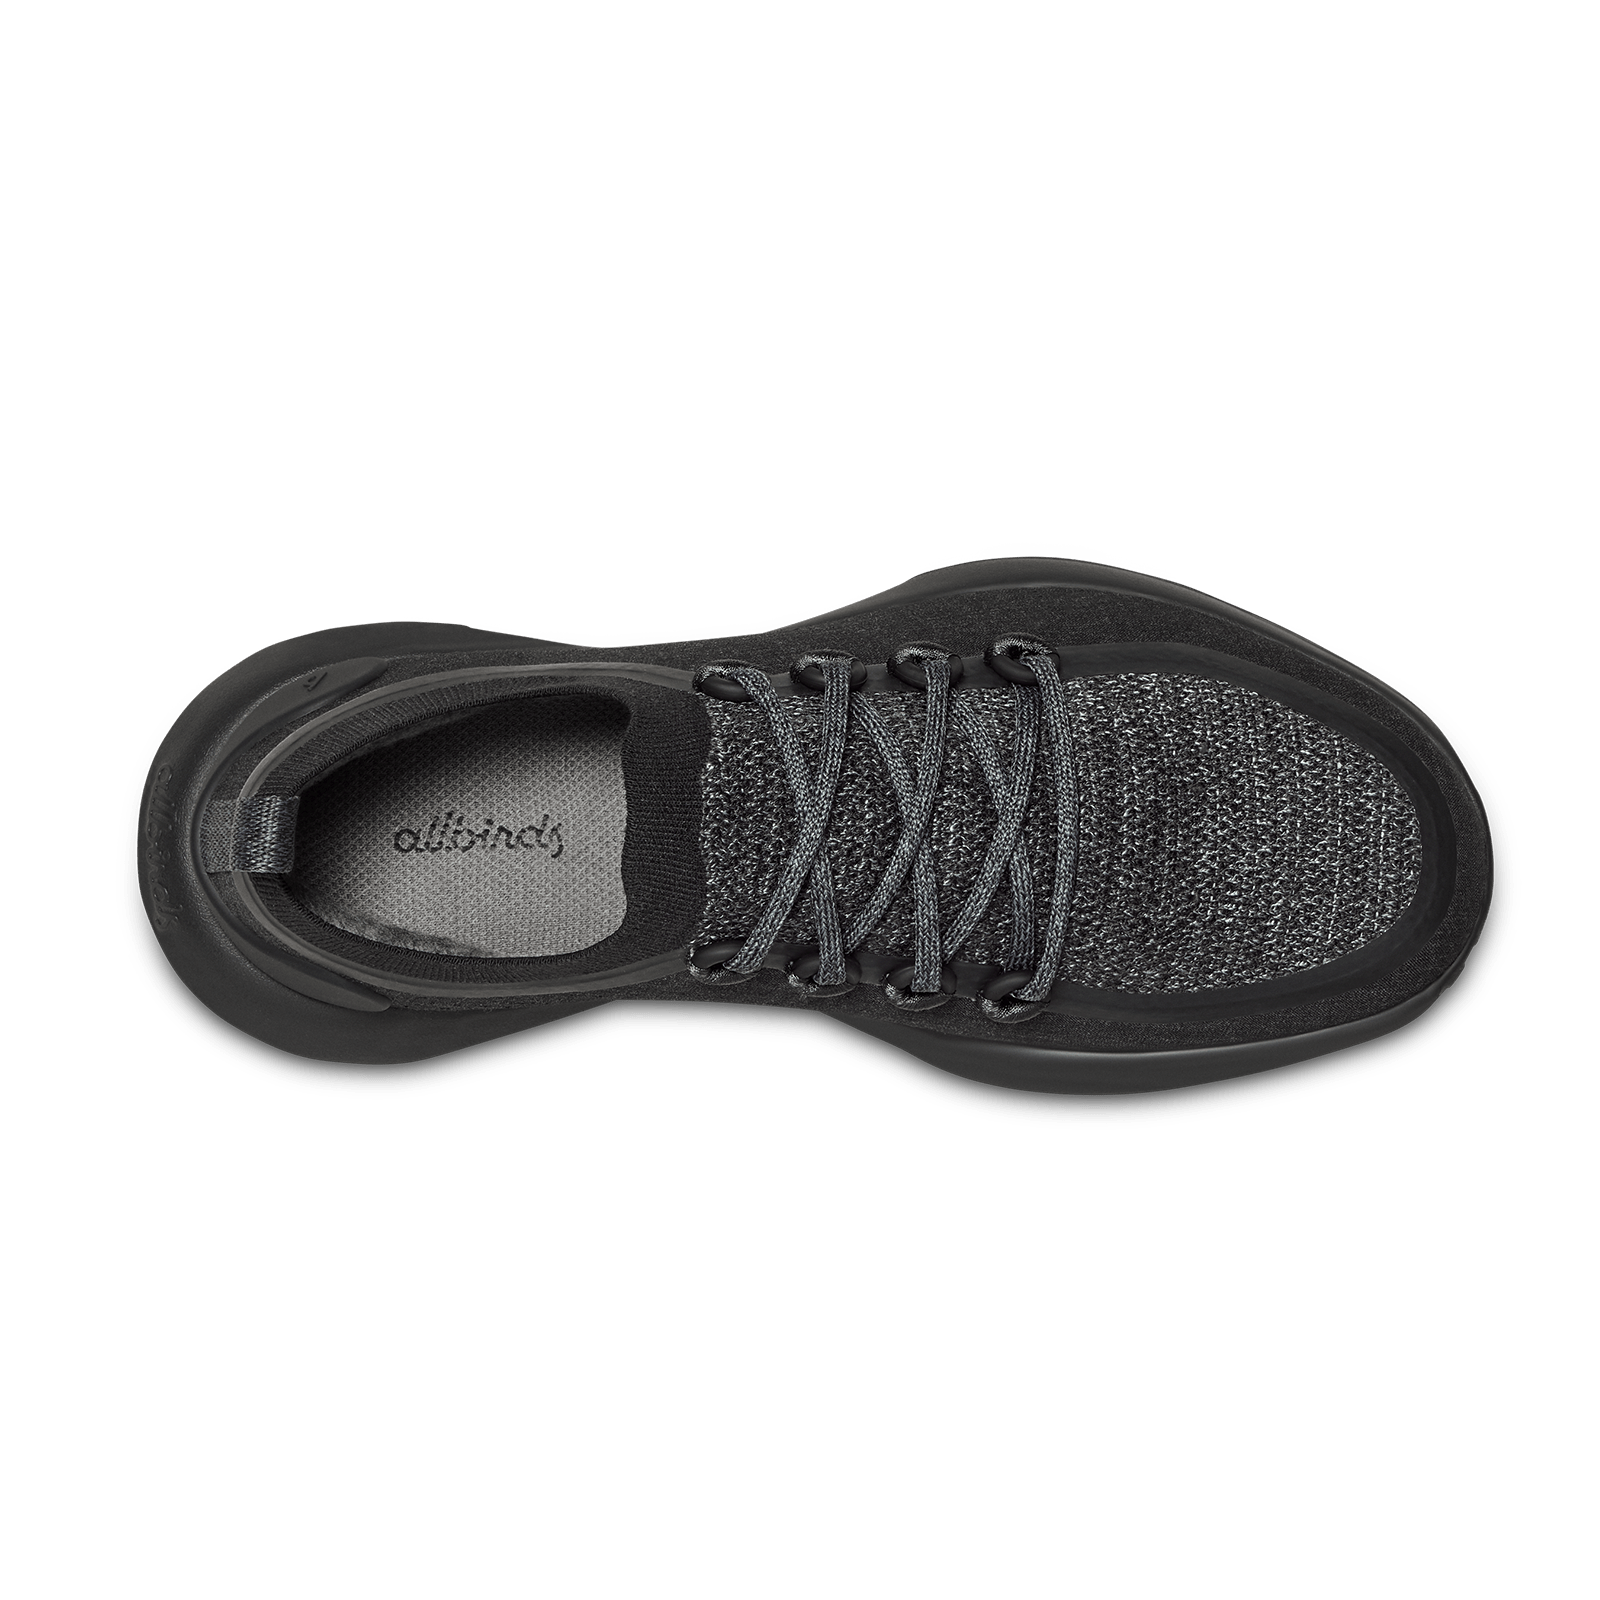 Men's Trail Runners SWT - Natural Black (Black Sole)